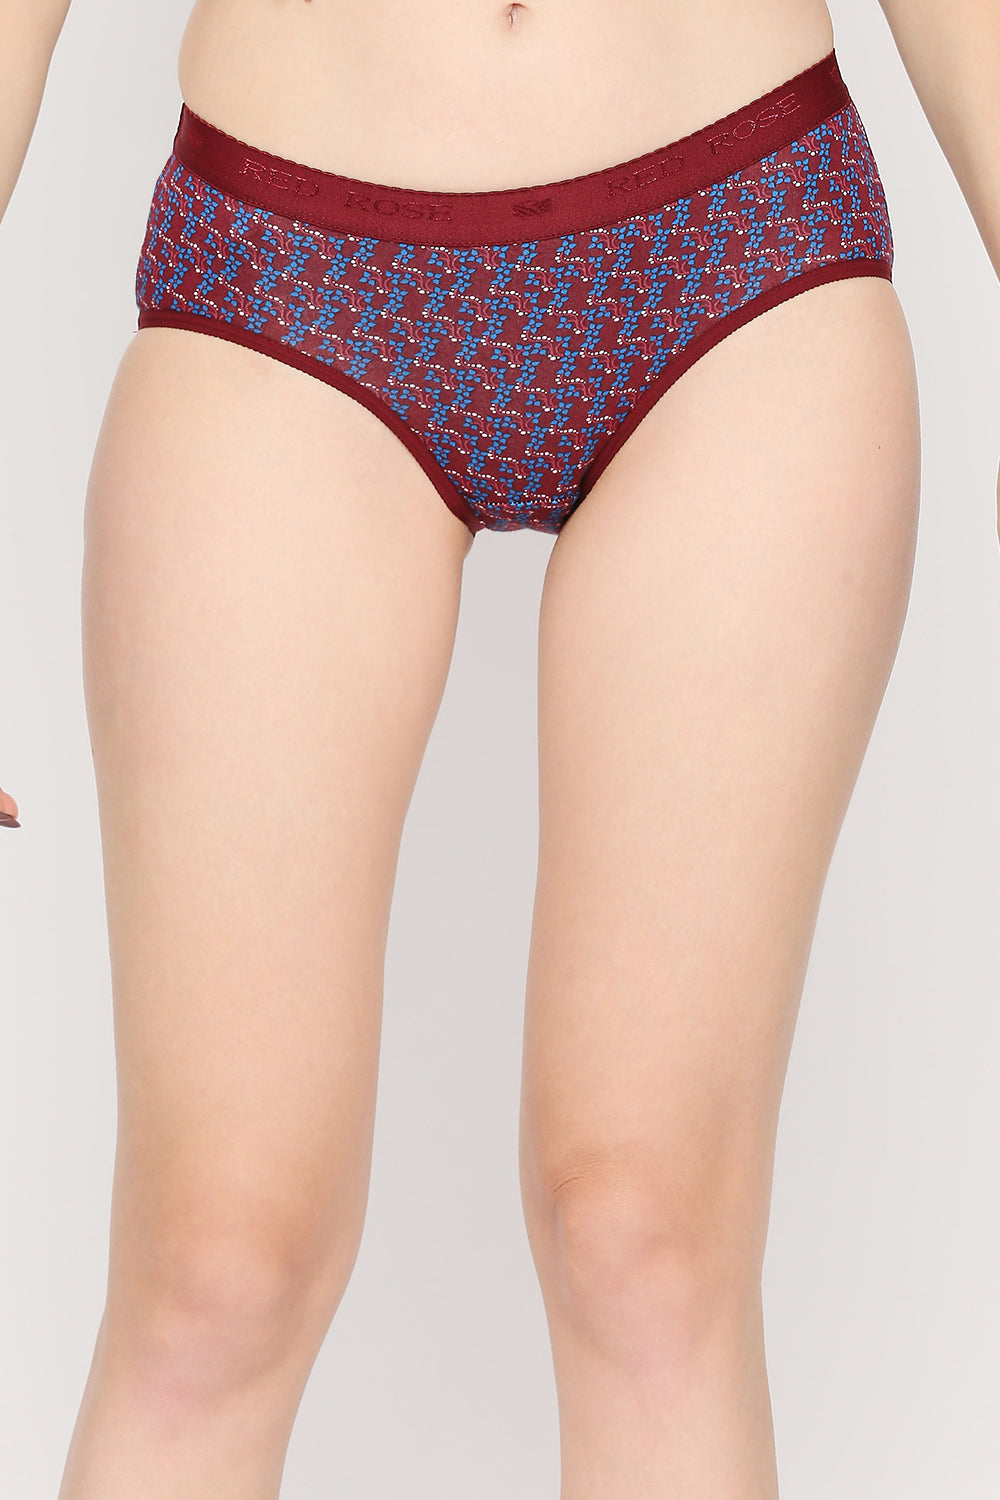 RED ROSE Cotton HIPSTER PANTY DIMPLE at Rs 145/piece in Bhiwandi